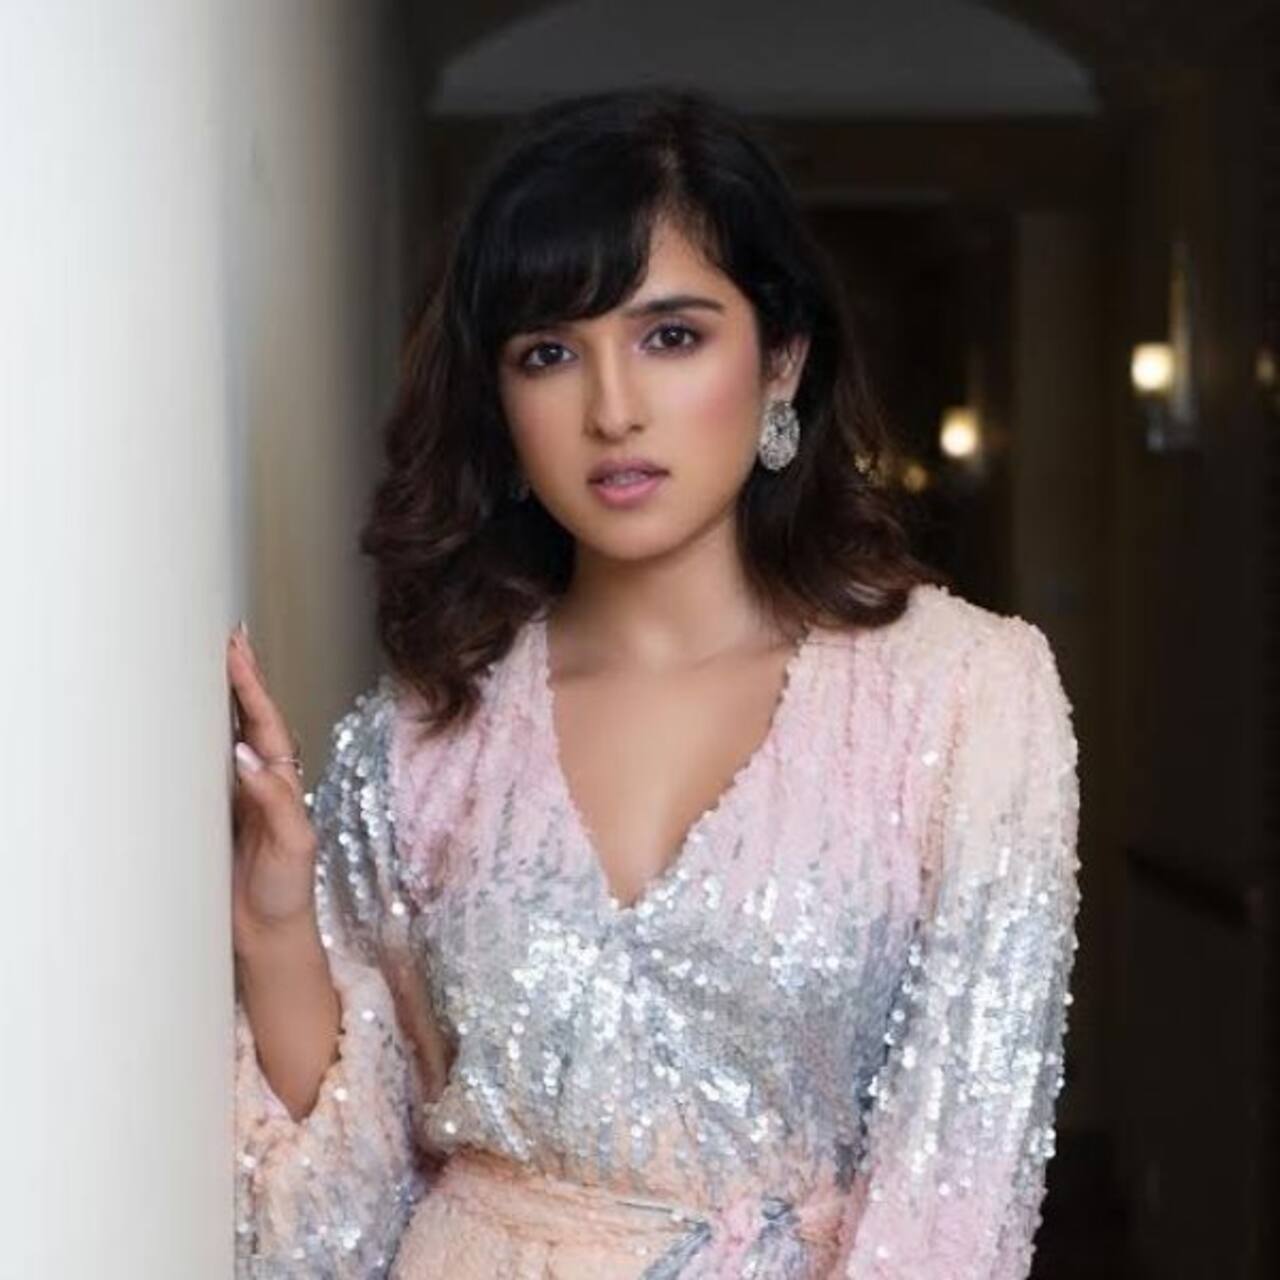 Maska: Shirley Setia on her Netflix film releasing during the coronavirus lockdown, ‘Never thought that it would arrive in this condition’ [EXCLUSIVE]